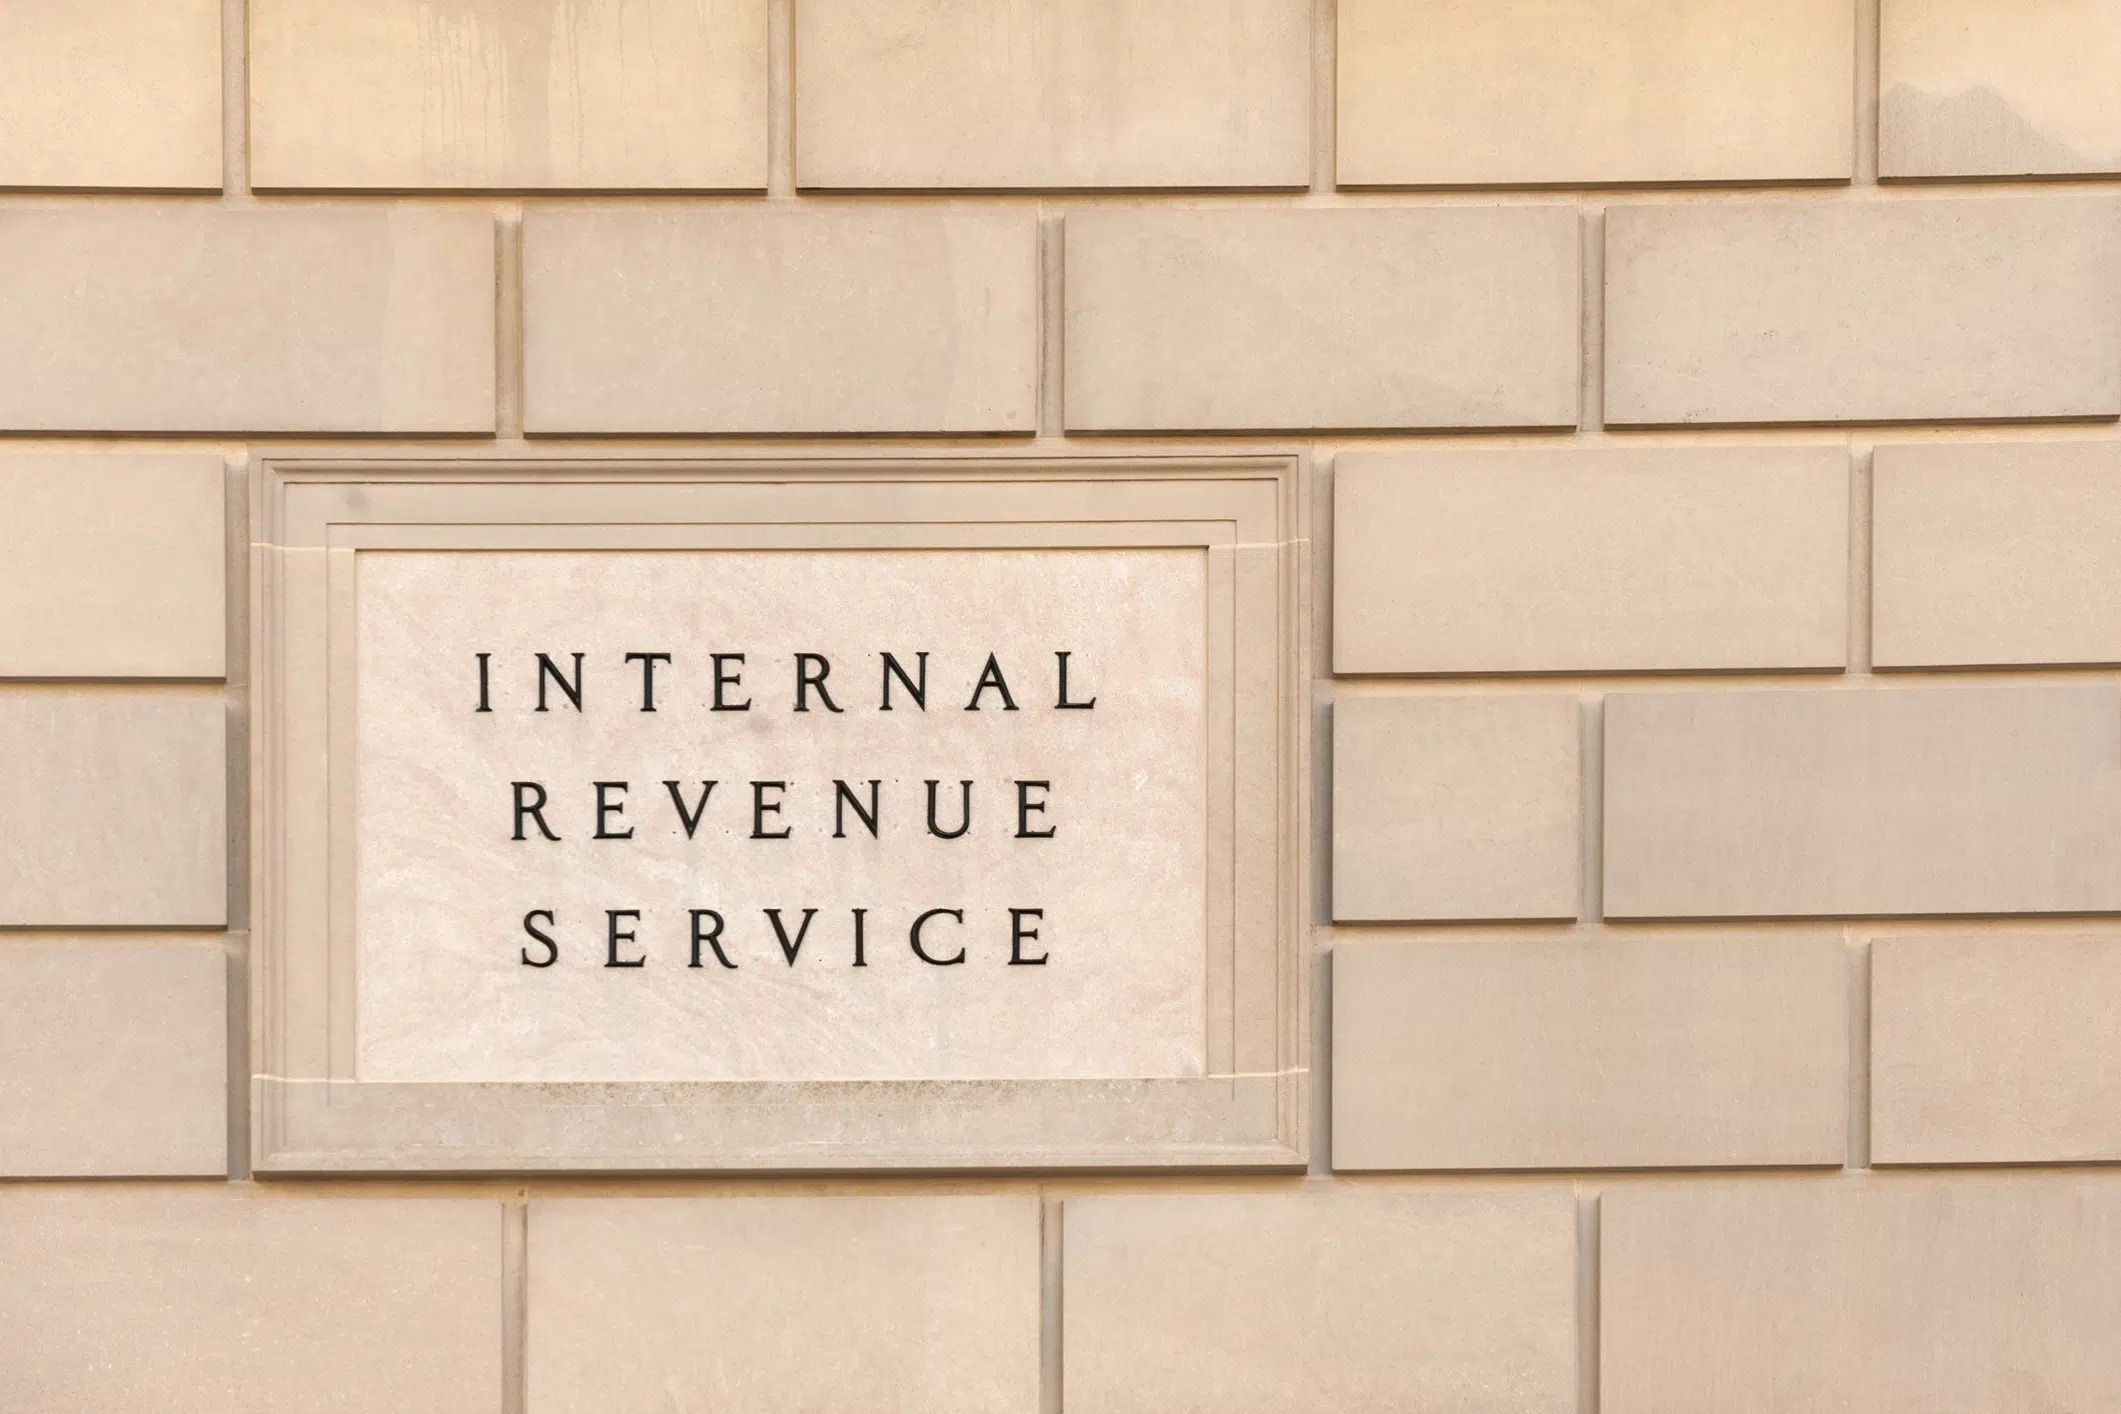 IRS Updates Form 941 To Reflect COVID-19 Tax Credits